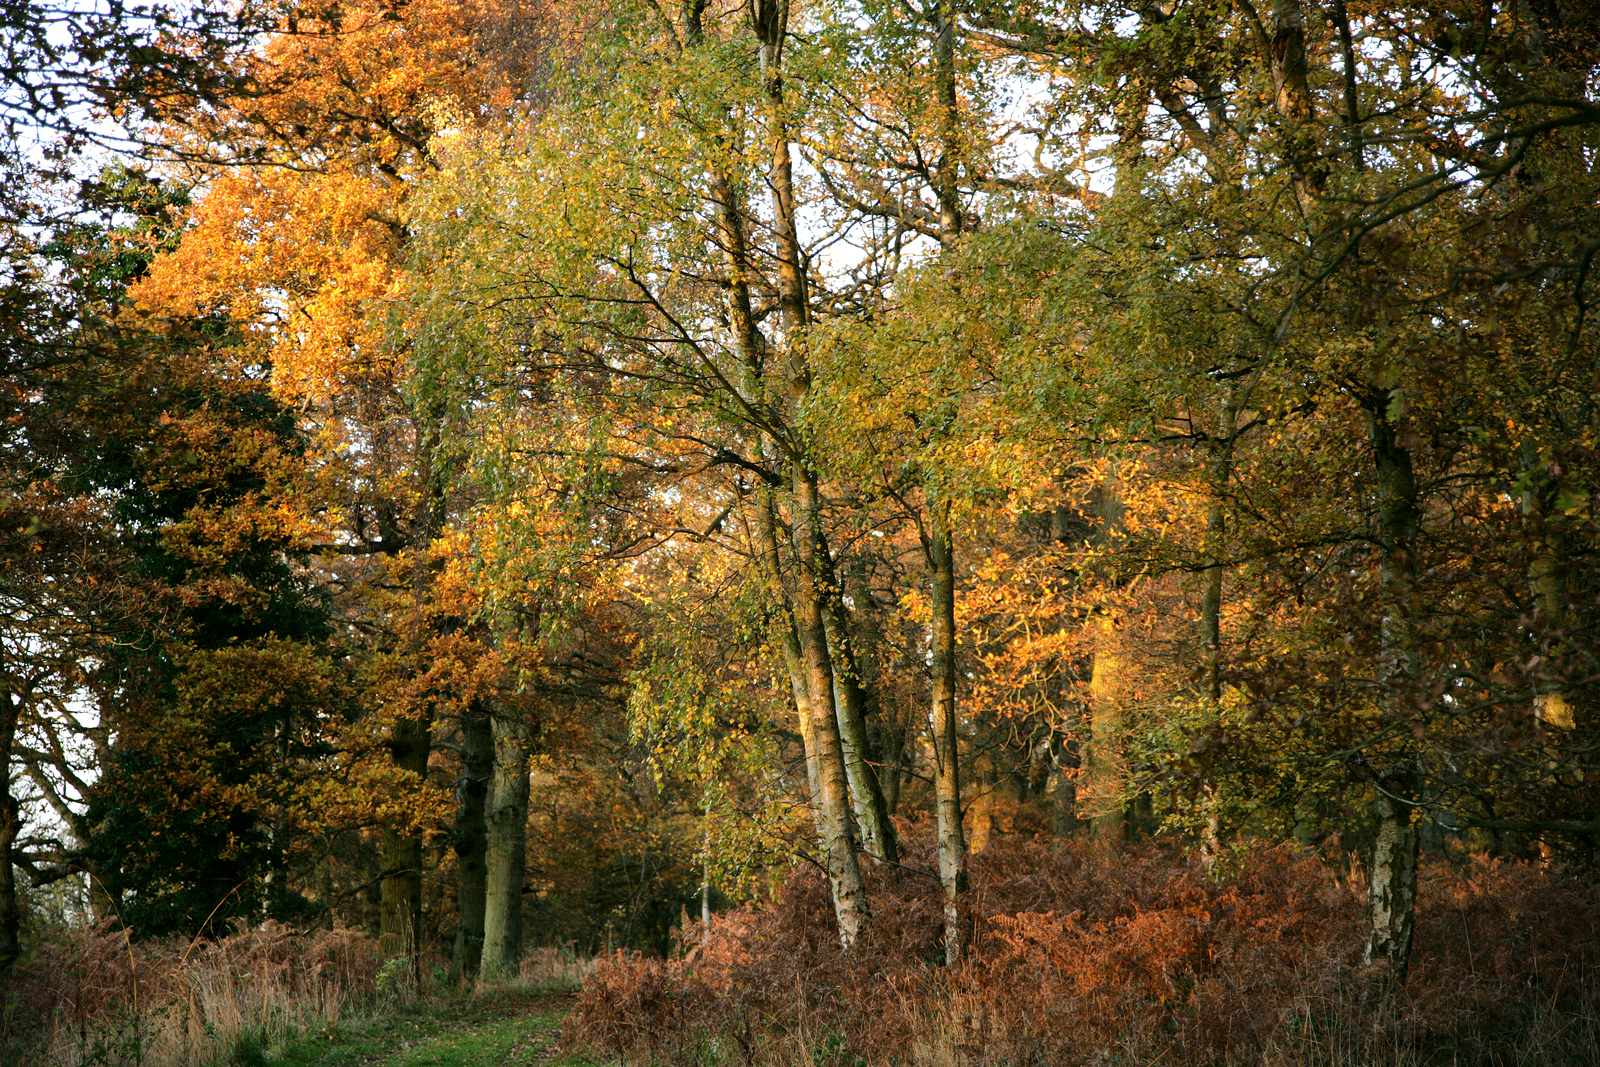 Autumnal trees in the Forest with yellow and orange leaves